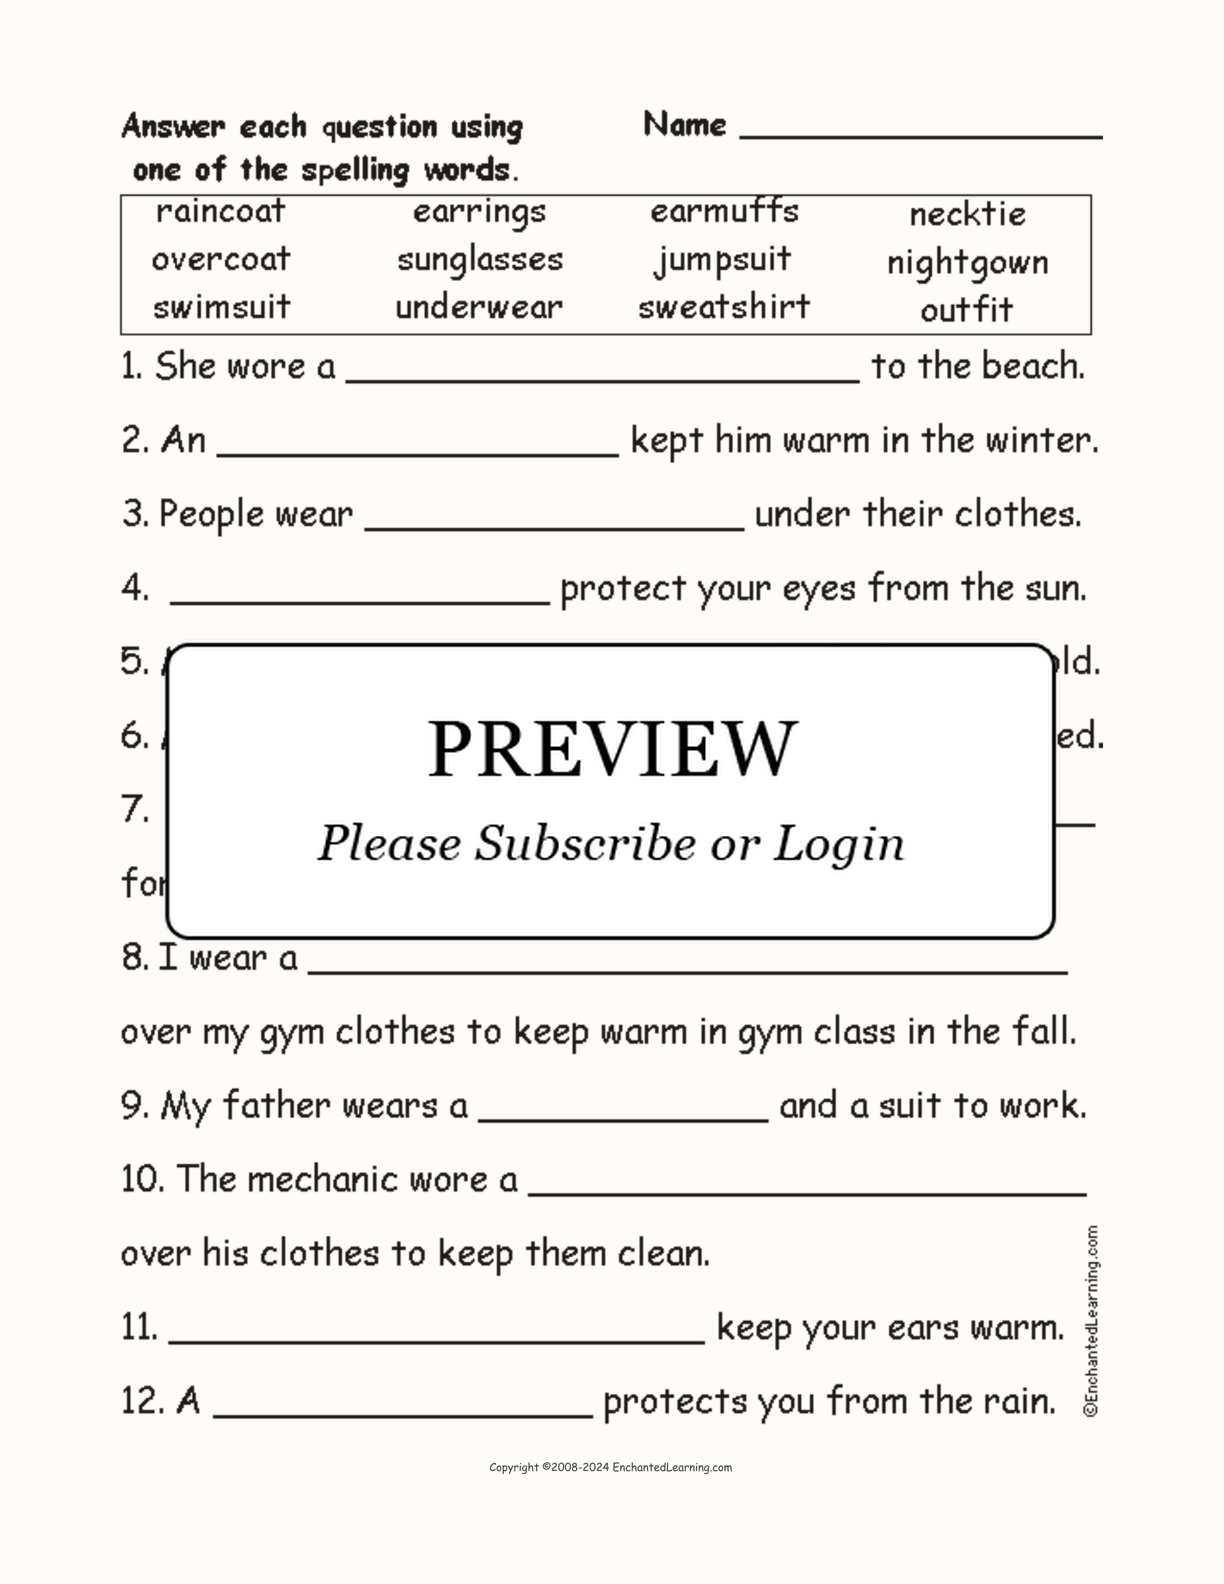 Compound Clothing Words: Spelling Questions interactive worksheet page 1